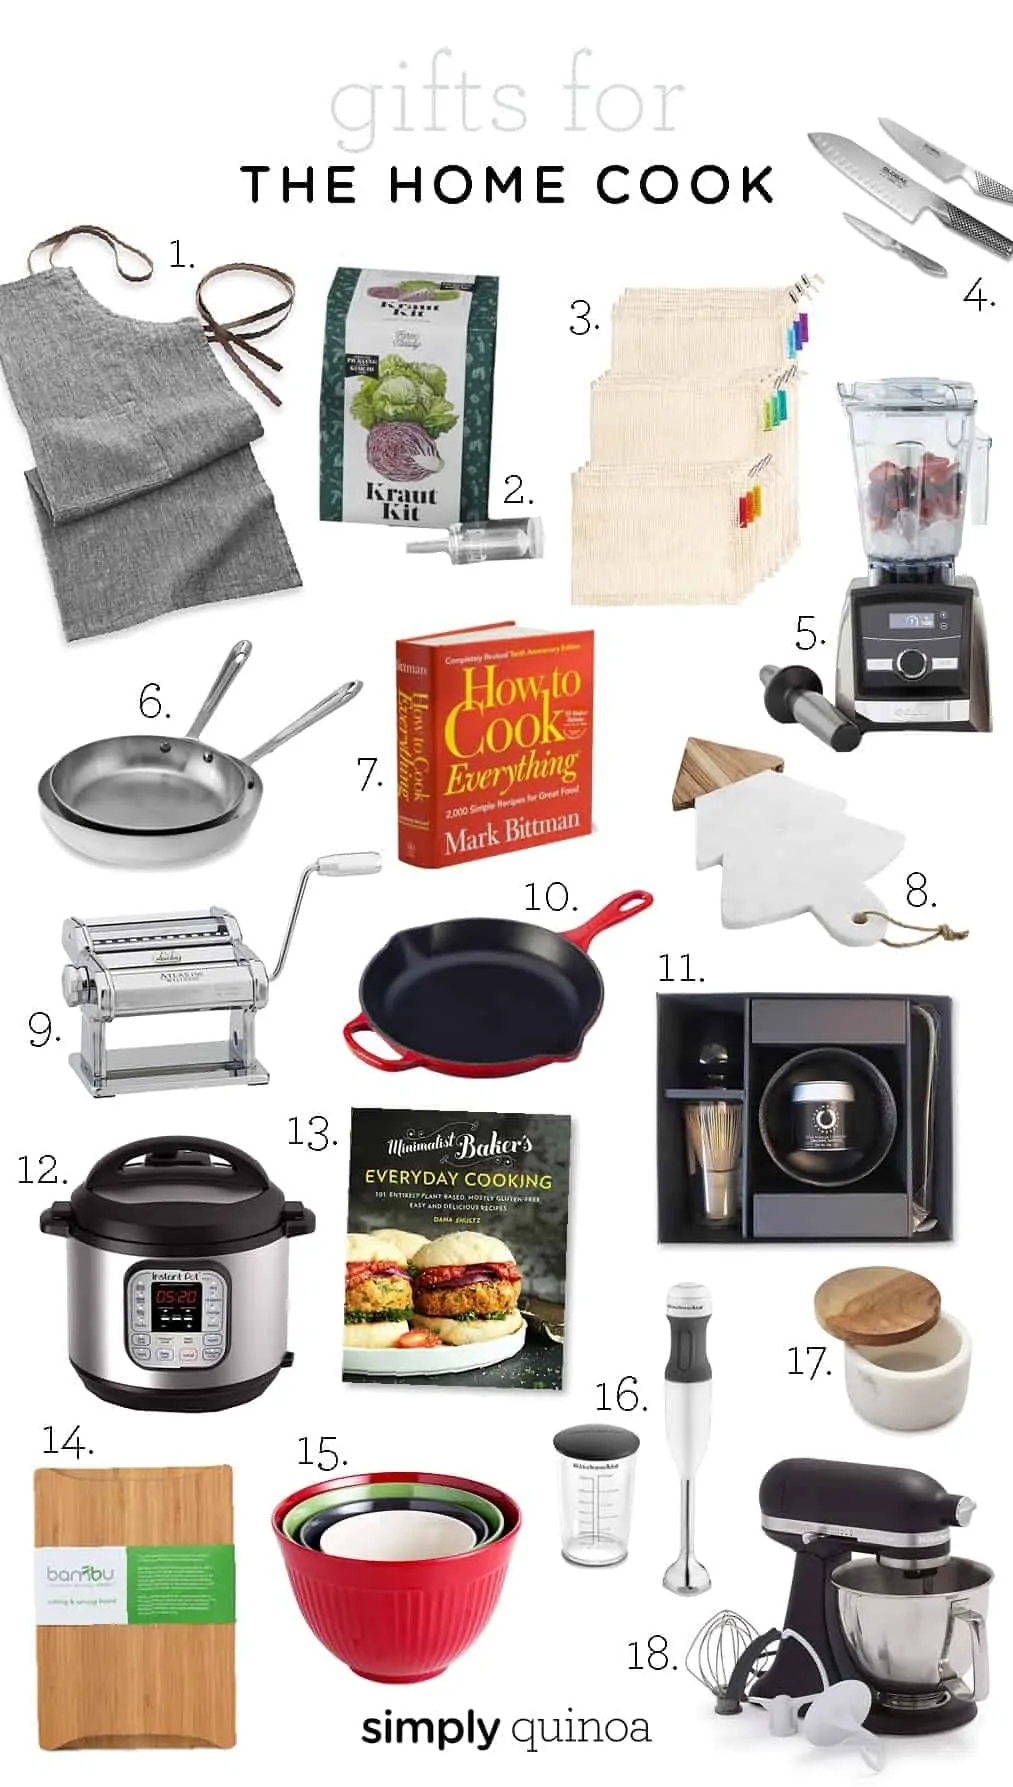 Gift Guide for Home Cook